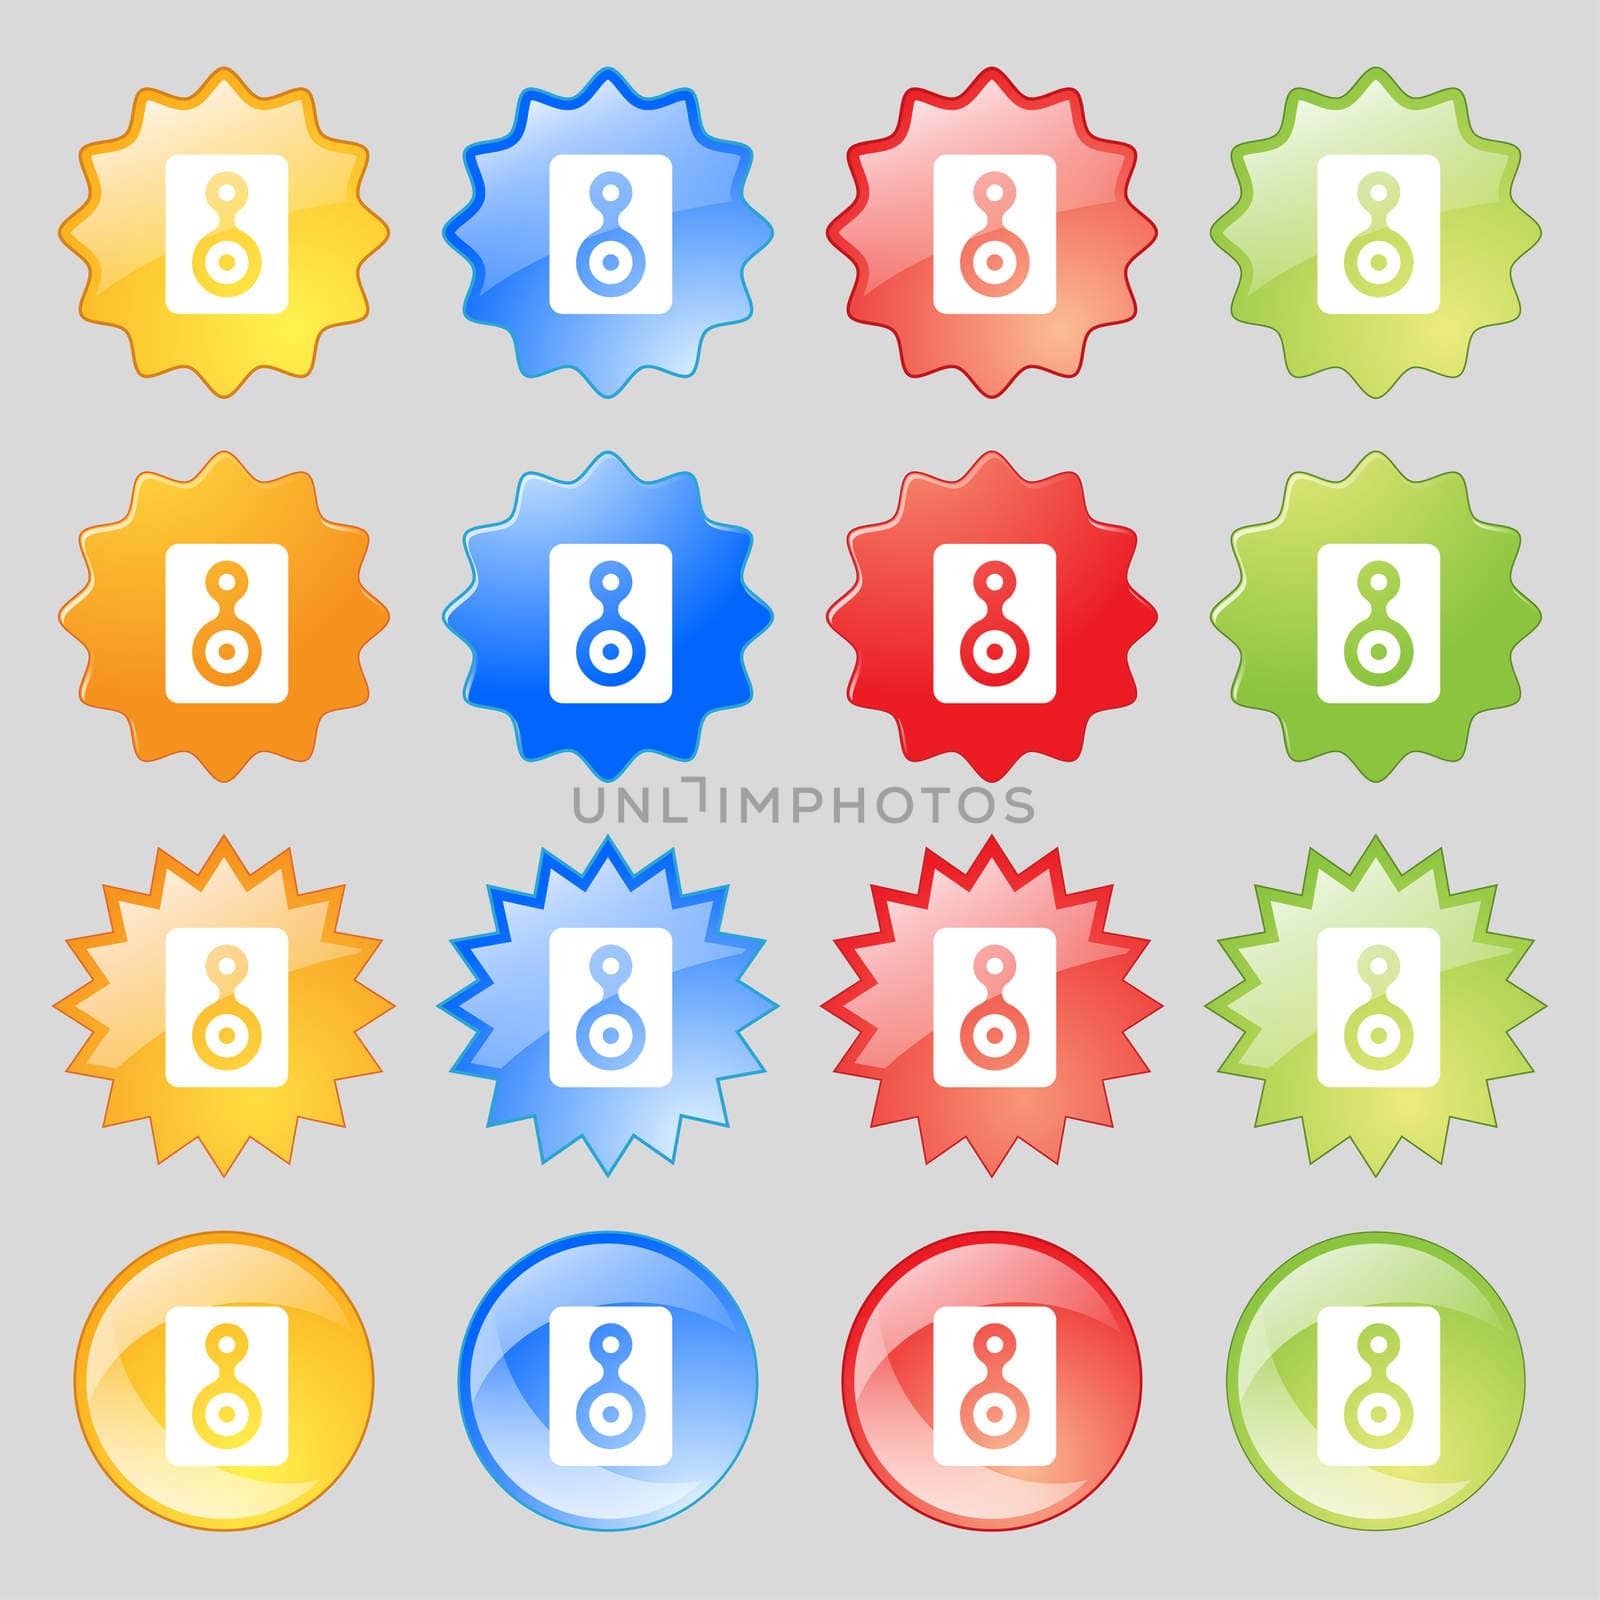 Video Tape icon sign. Set from sixteen multi-colored glass buttons with place for text. illustration